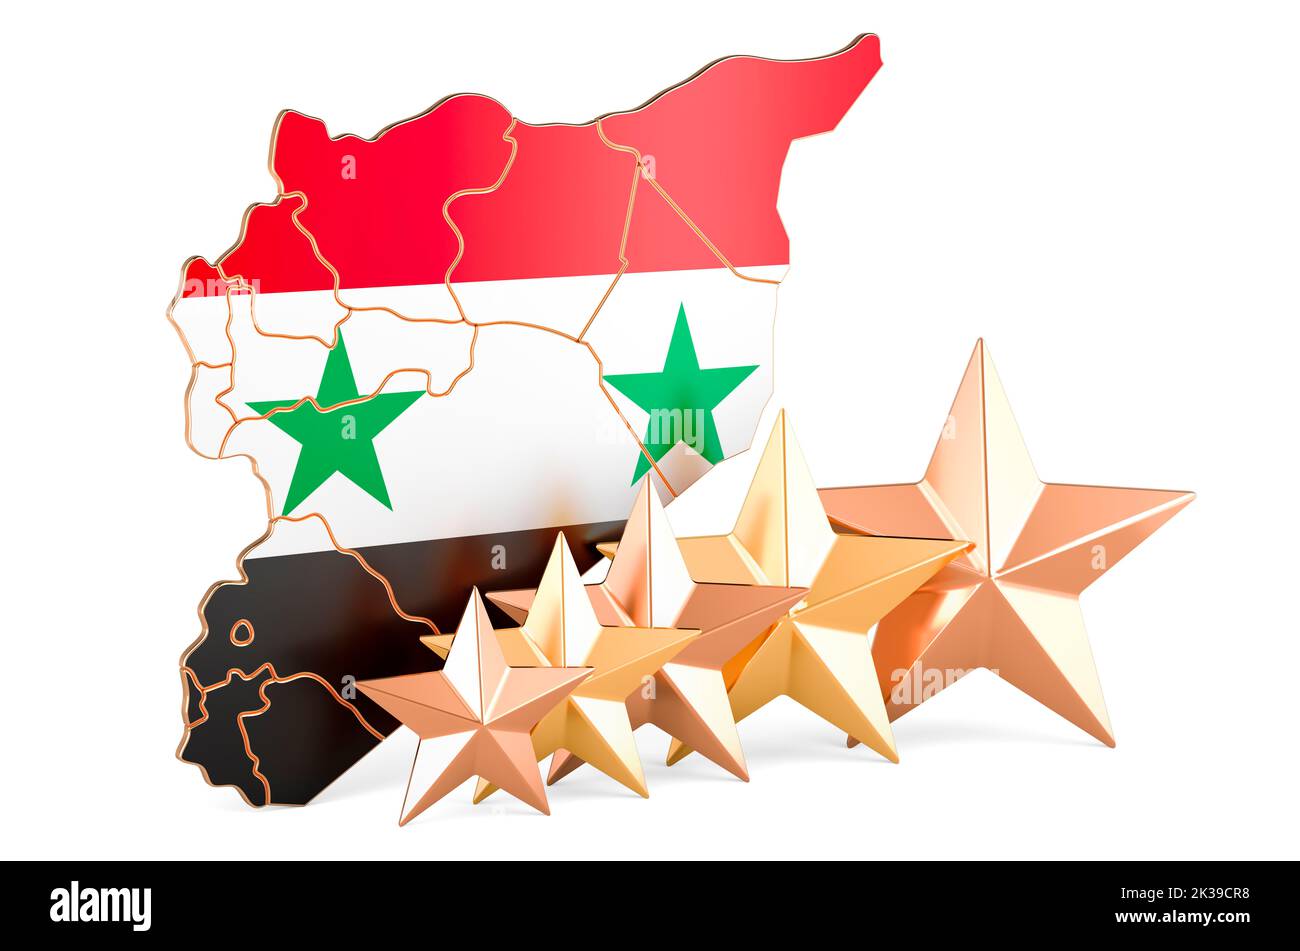 Syrian map with five stars. Rating, quality, service in Syria. 3D rendering isolated on white background Stock Photo